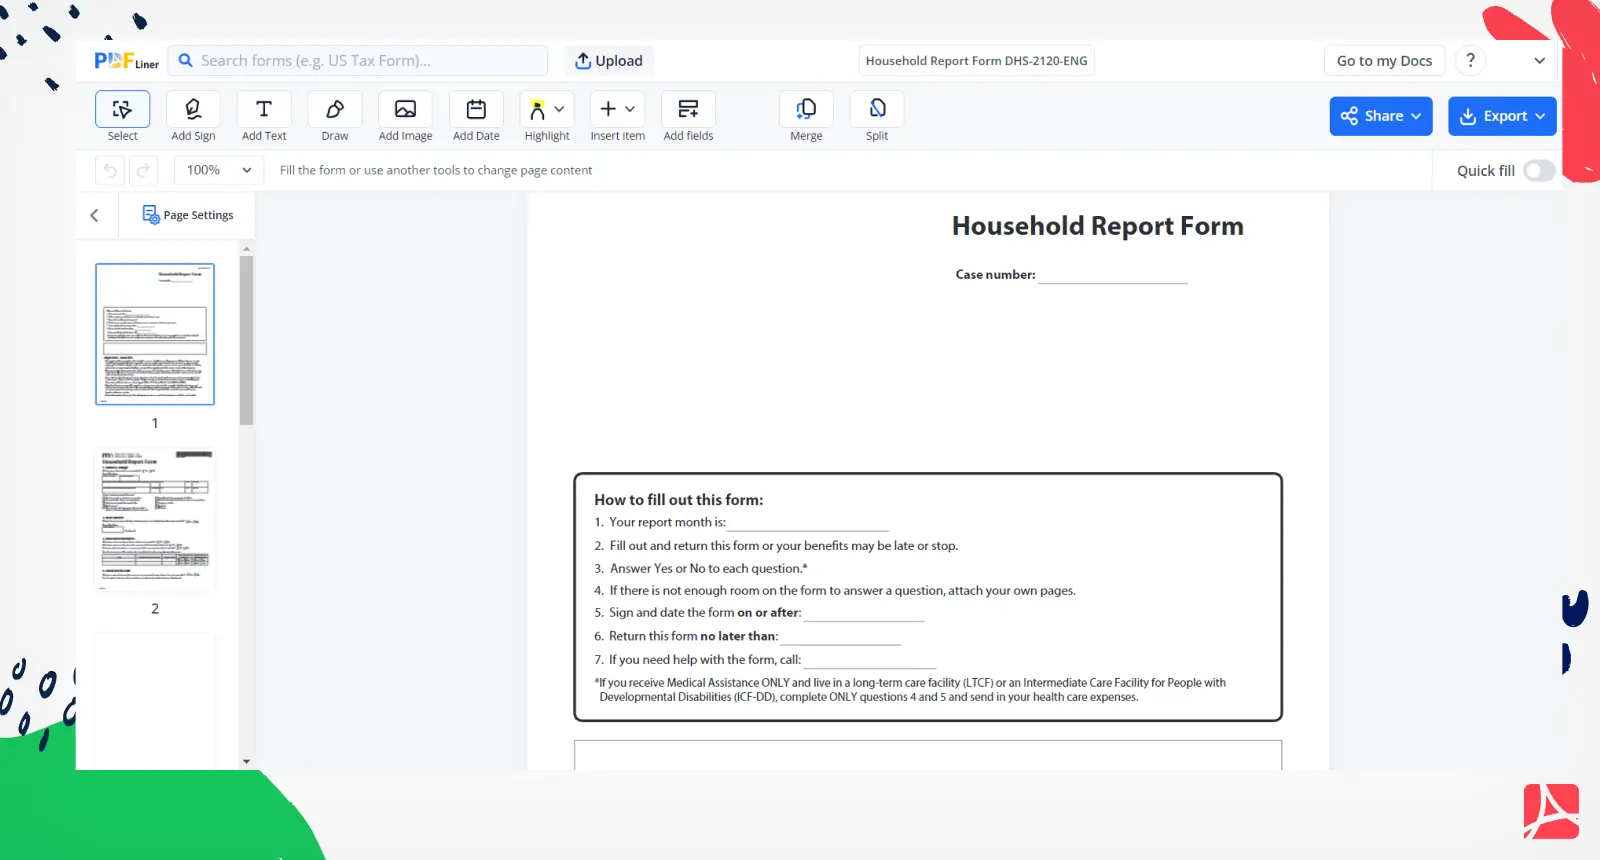 Household Report Form DHS-2120-ENG Screenshot